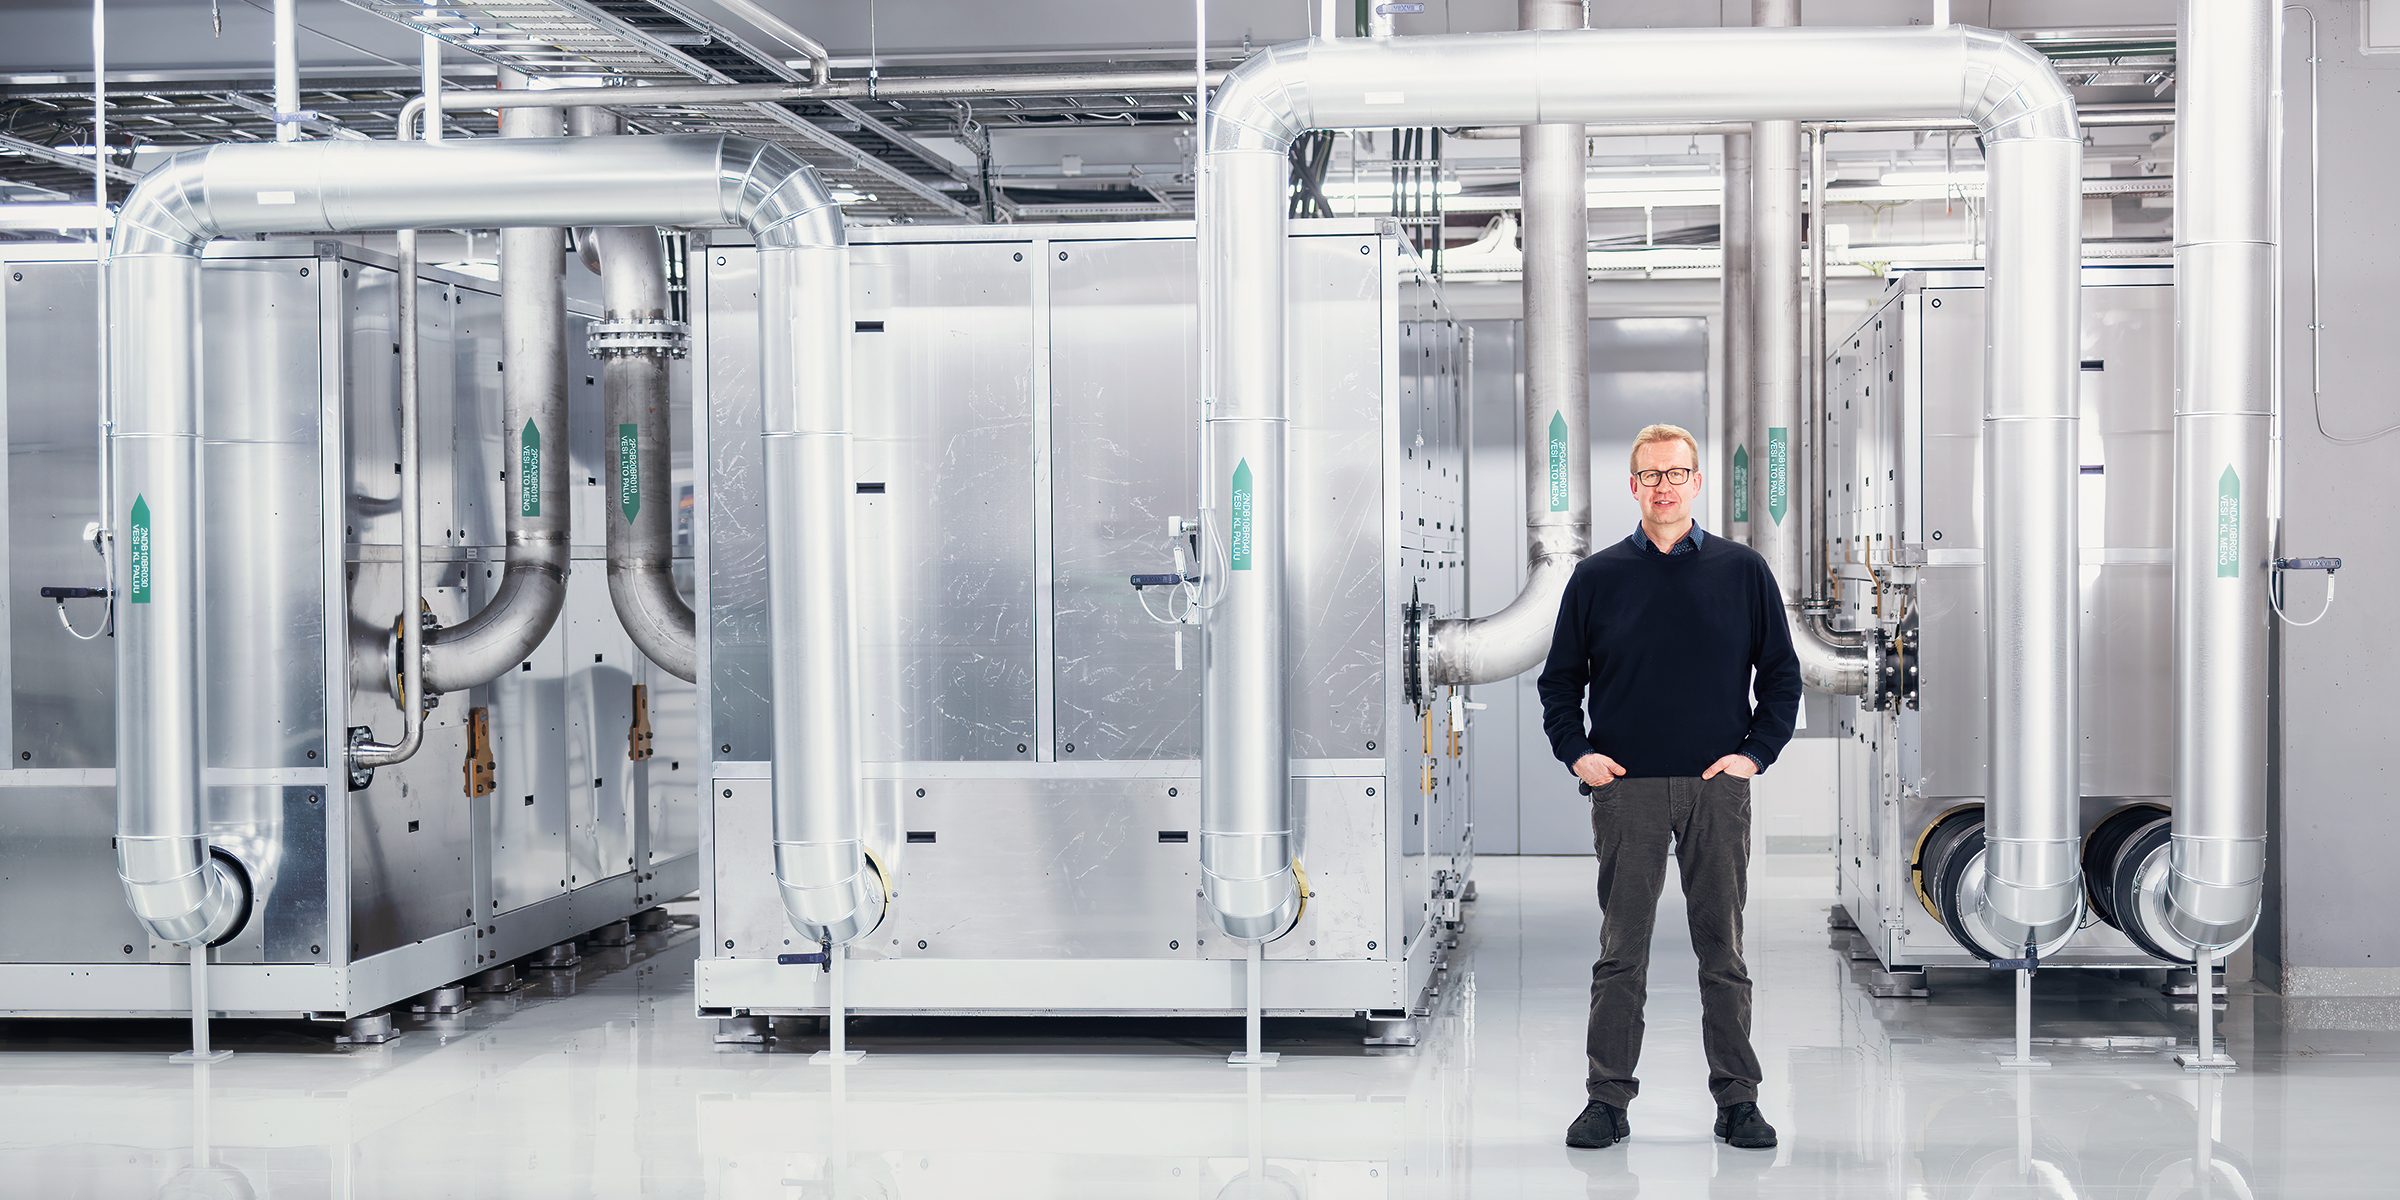 In the Telia Helsinki Data Center, data room space is available as much as four large football fields, or about 15,000 square meters, says Matti Tella.